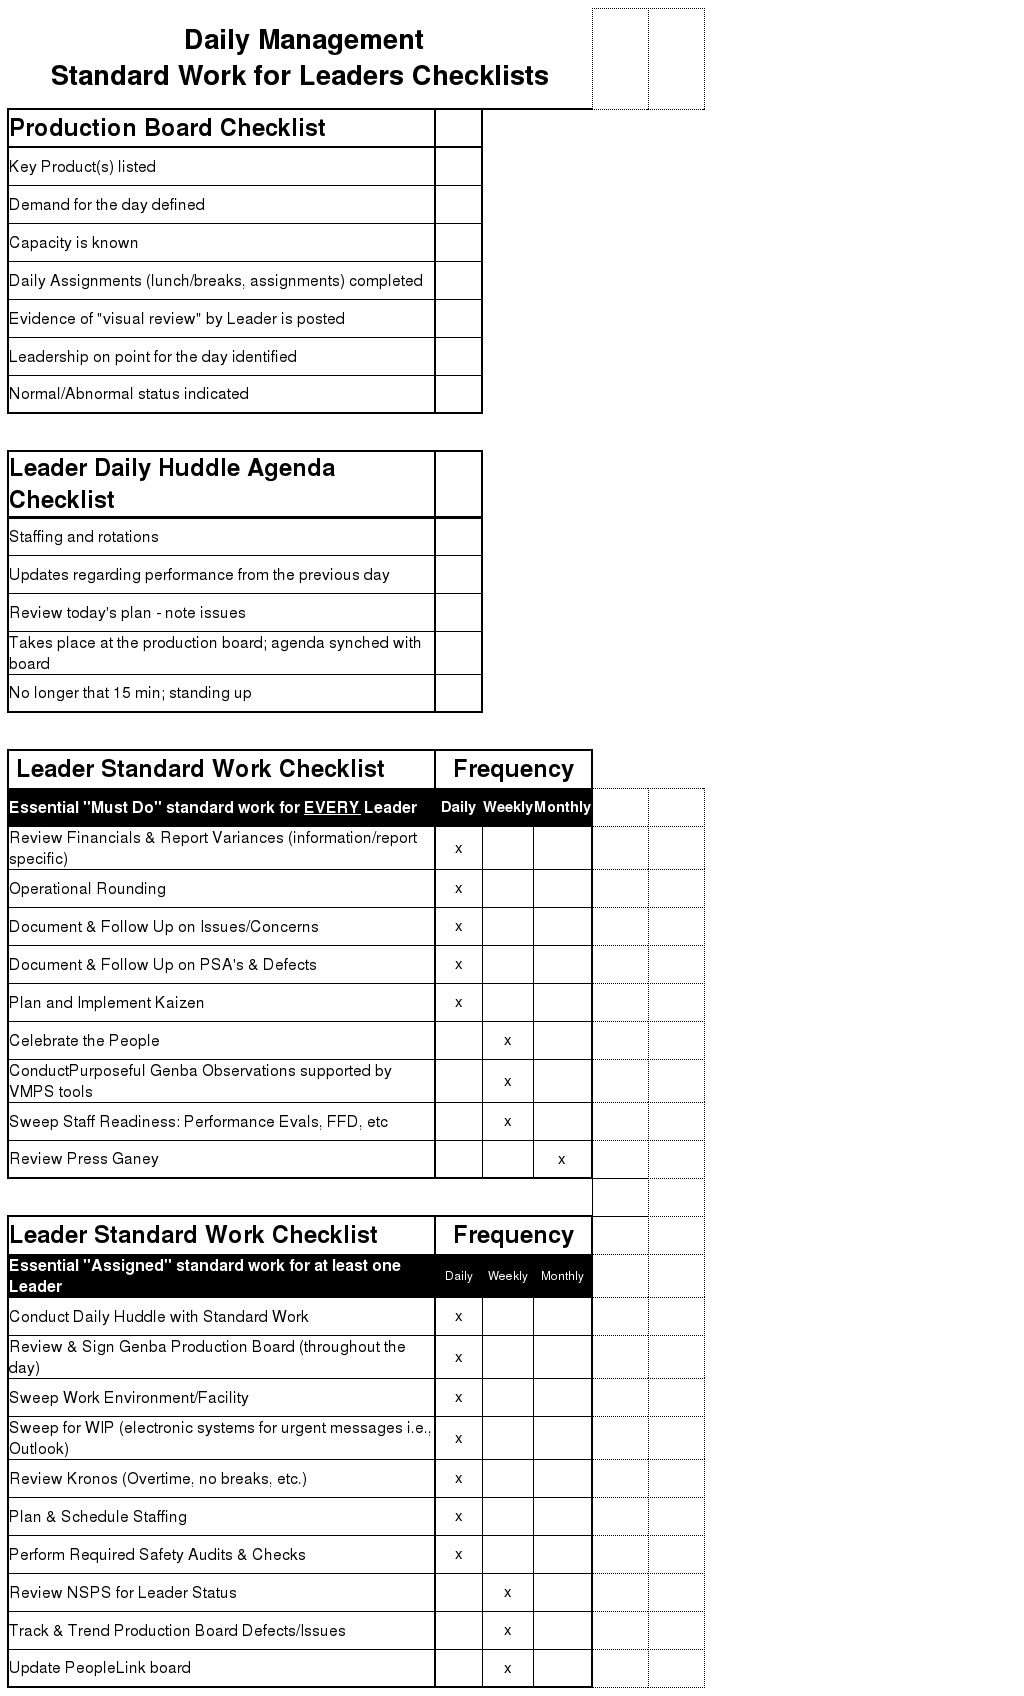 10standard work for leaders daily checklist sample